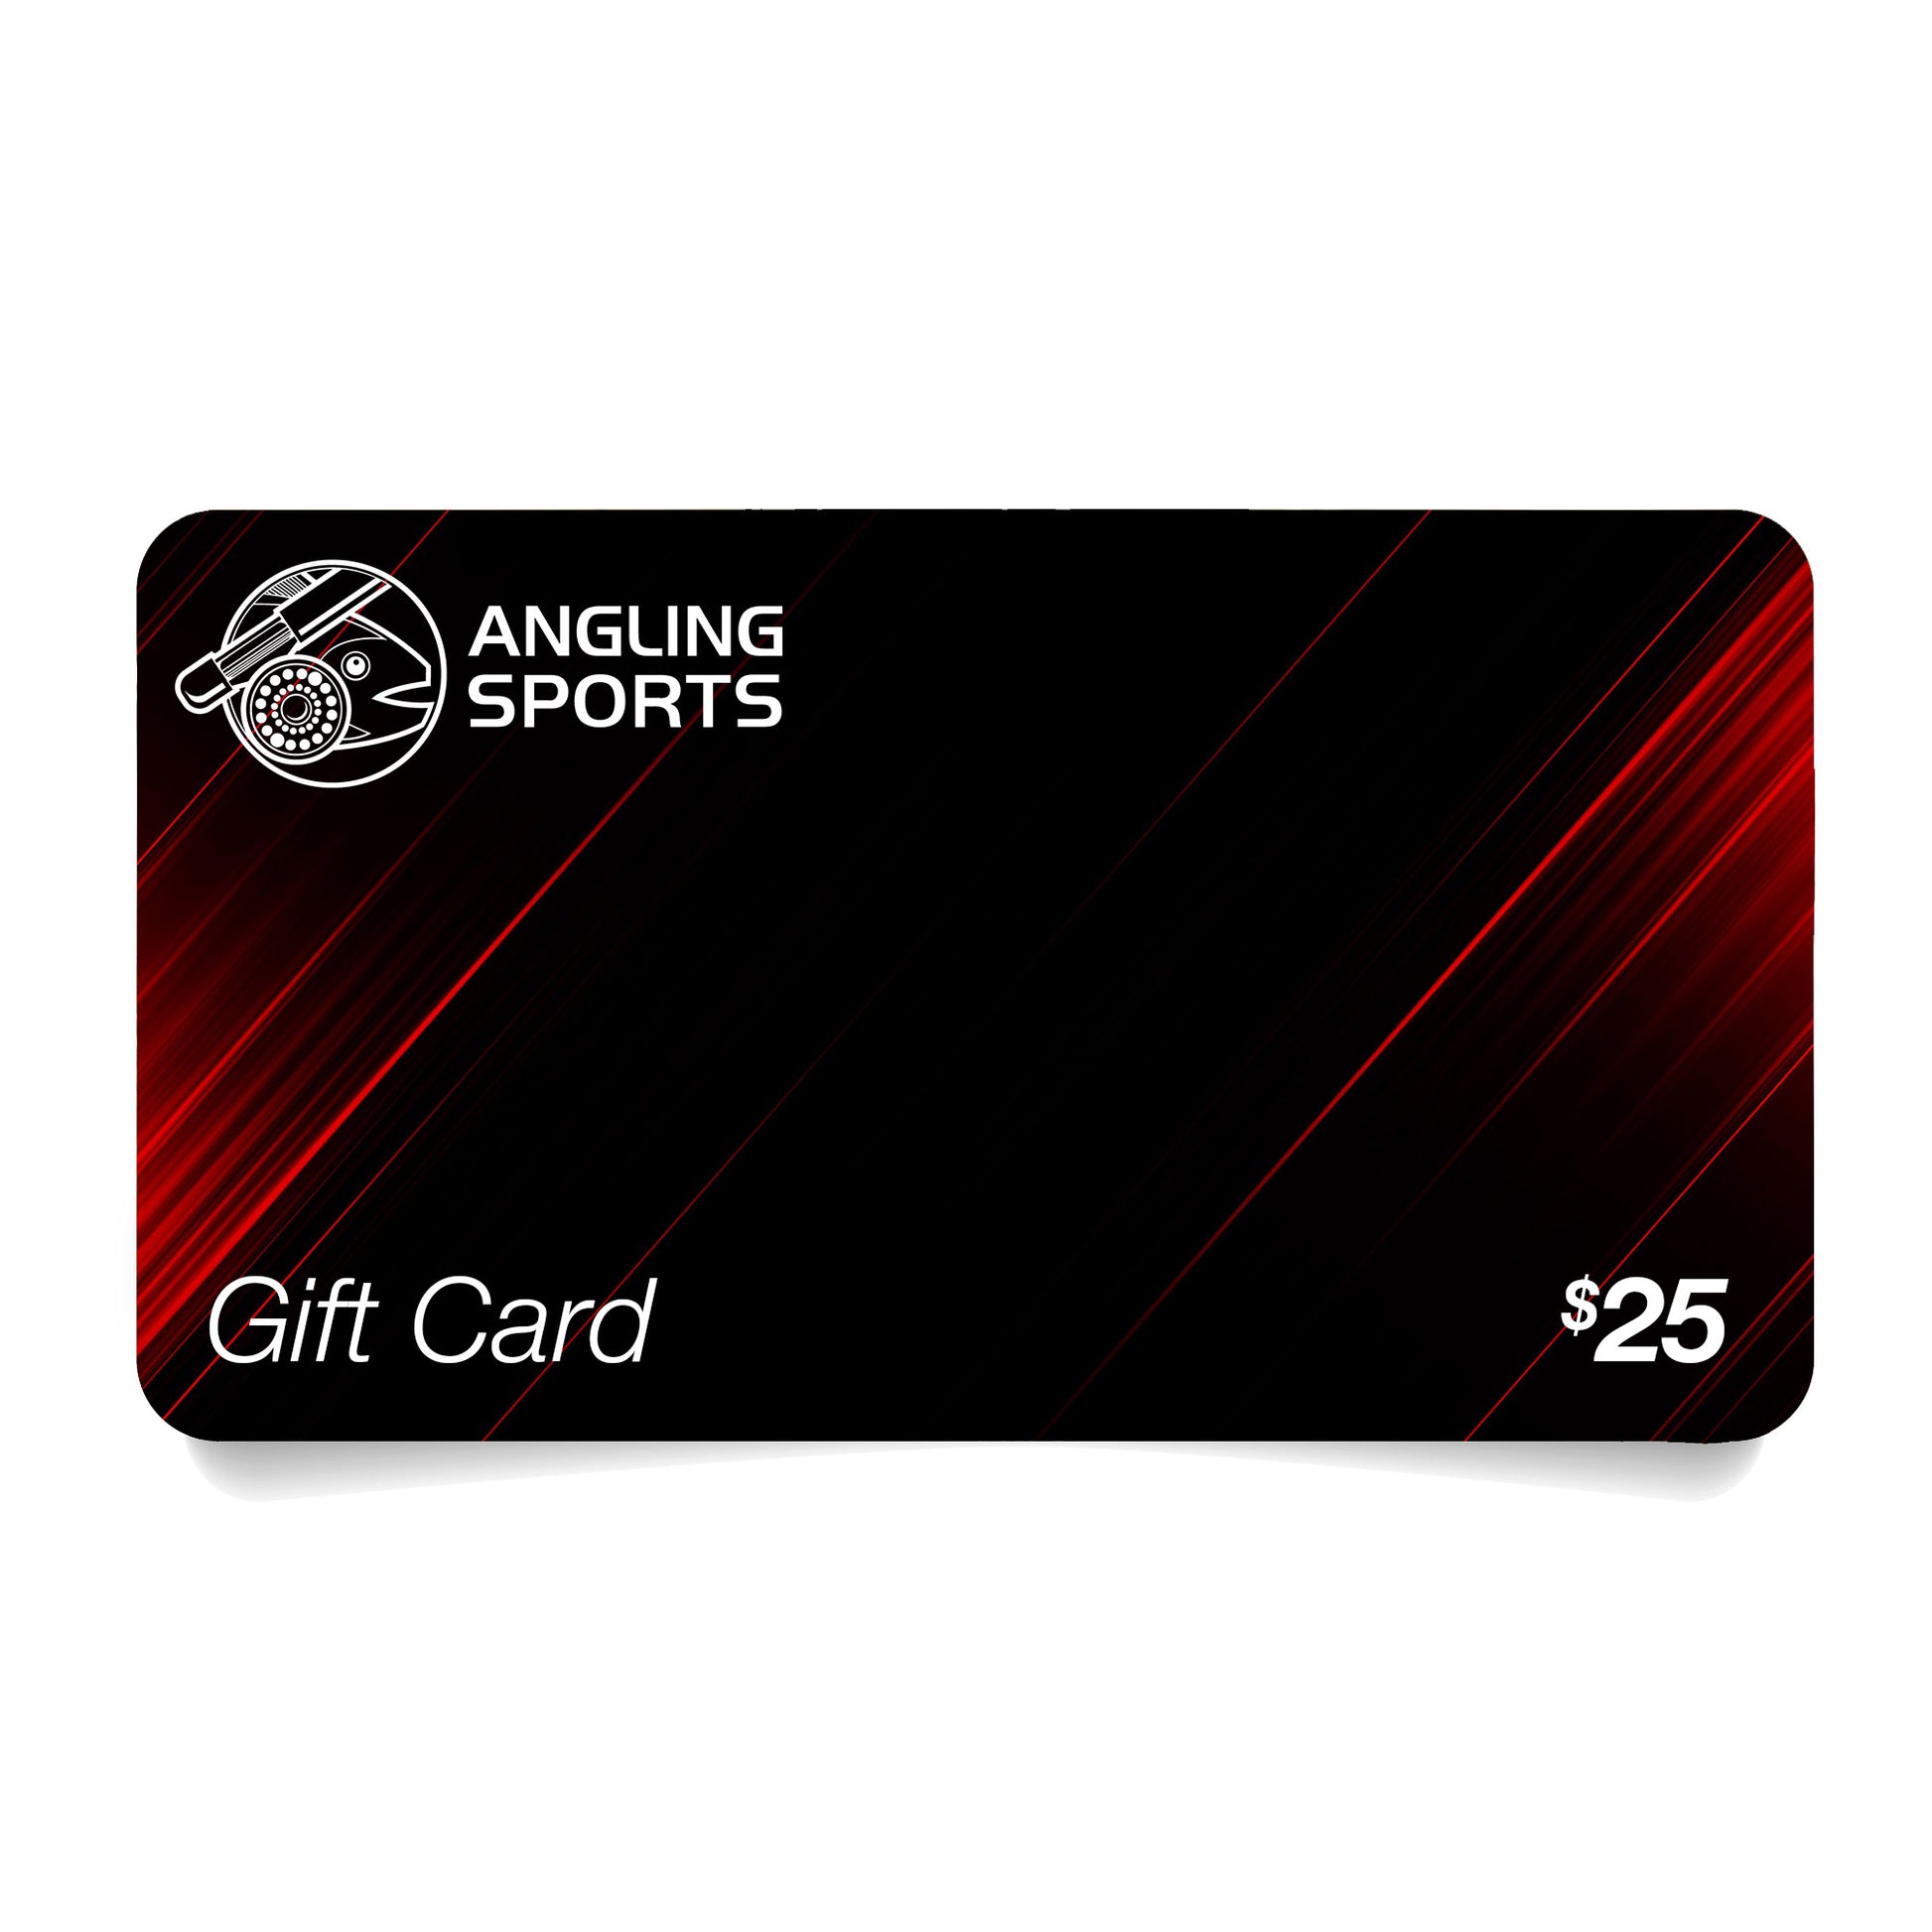 Angling Sports Gift Card $25